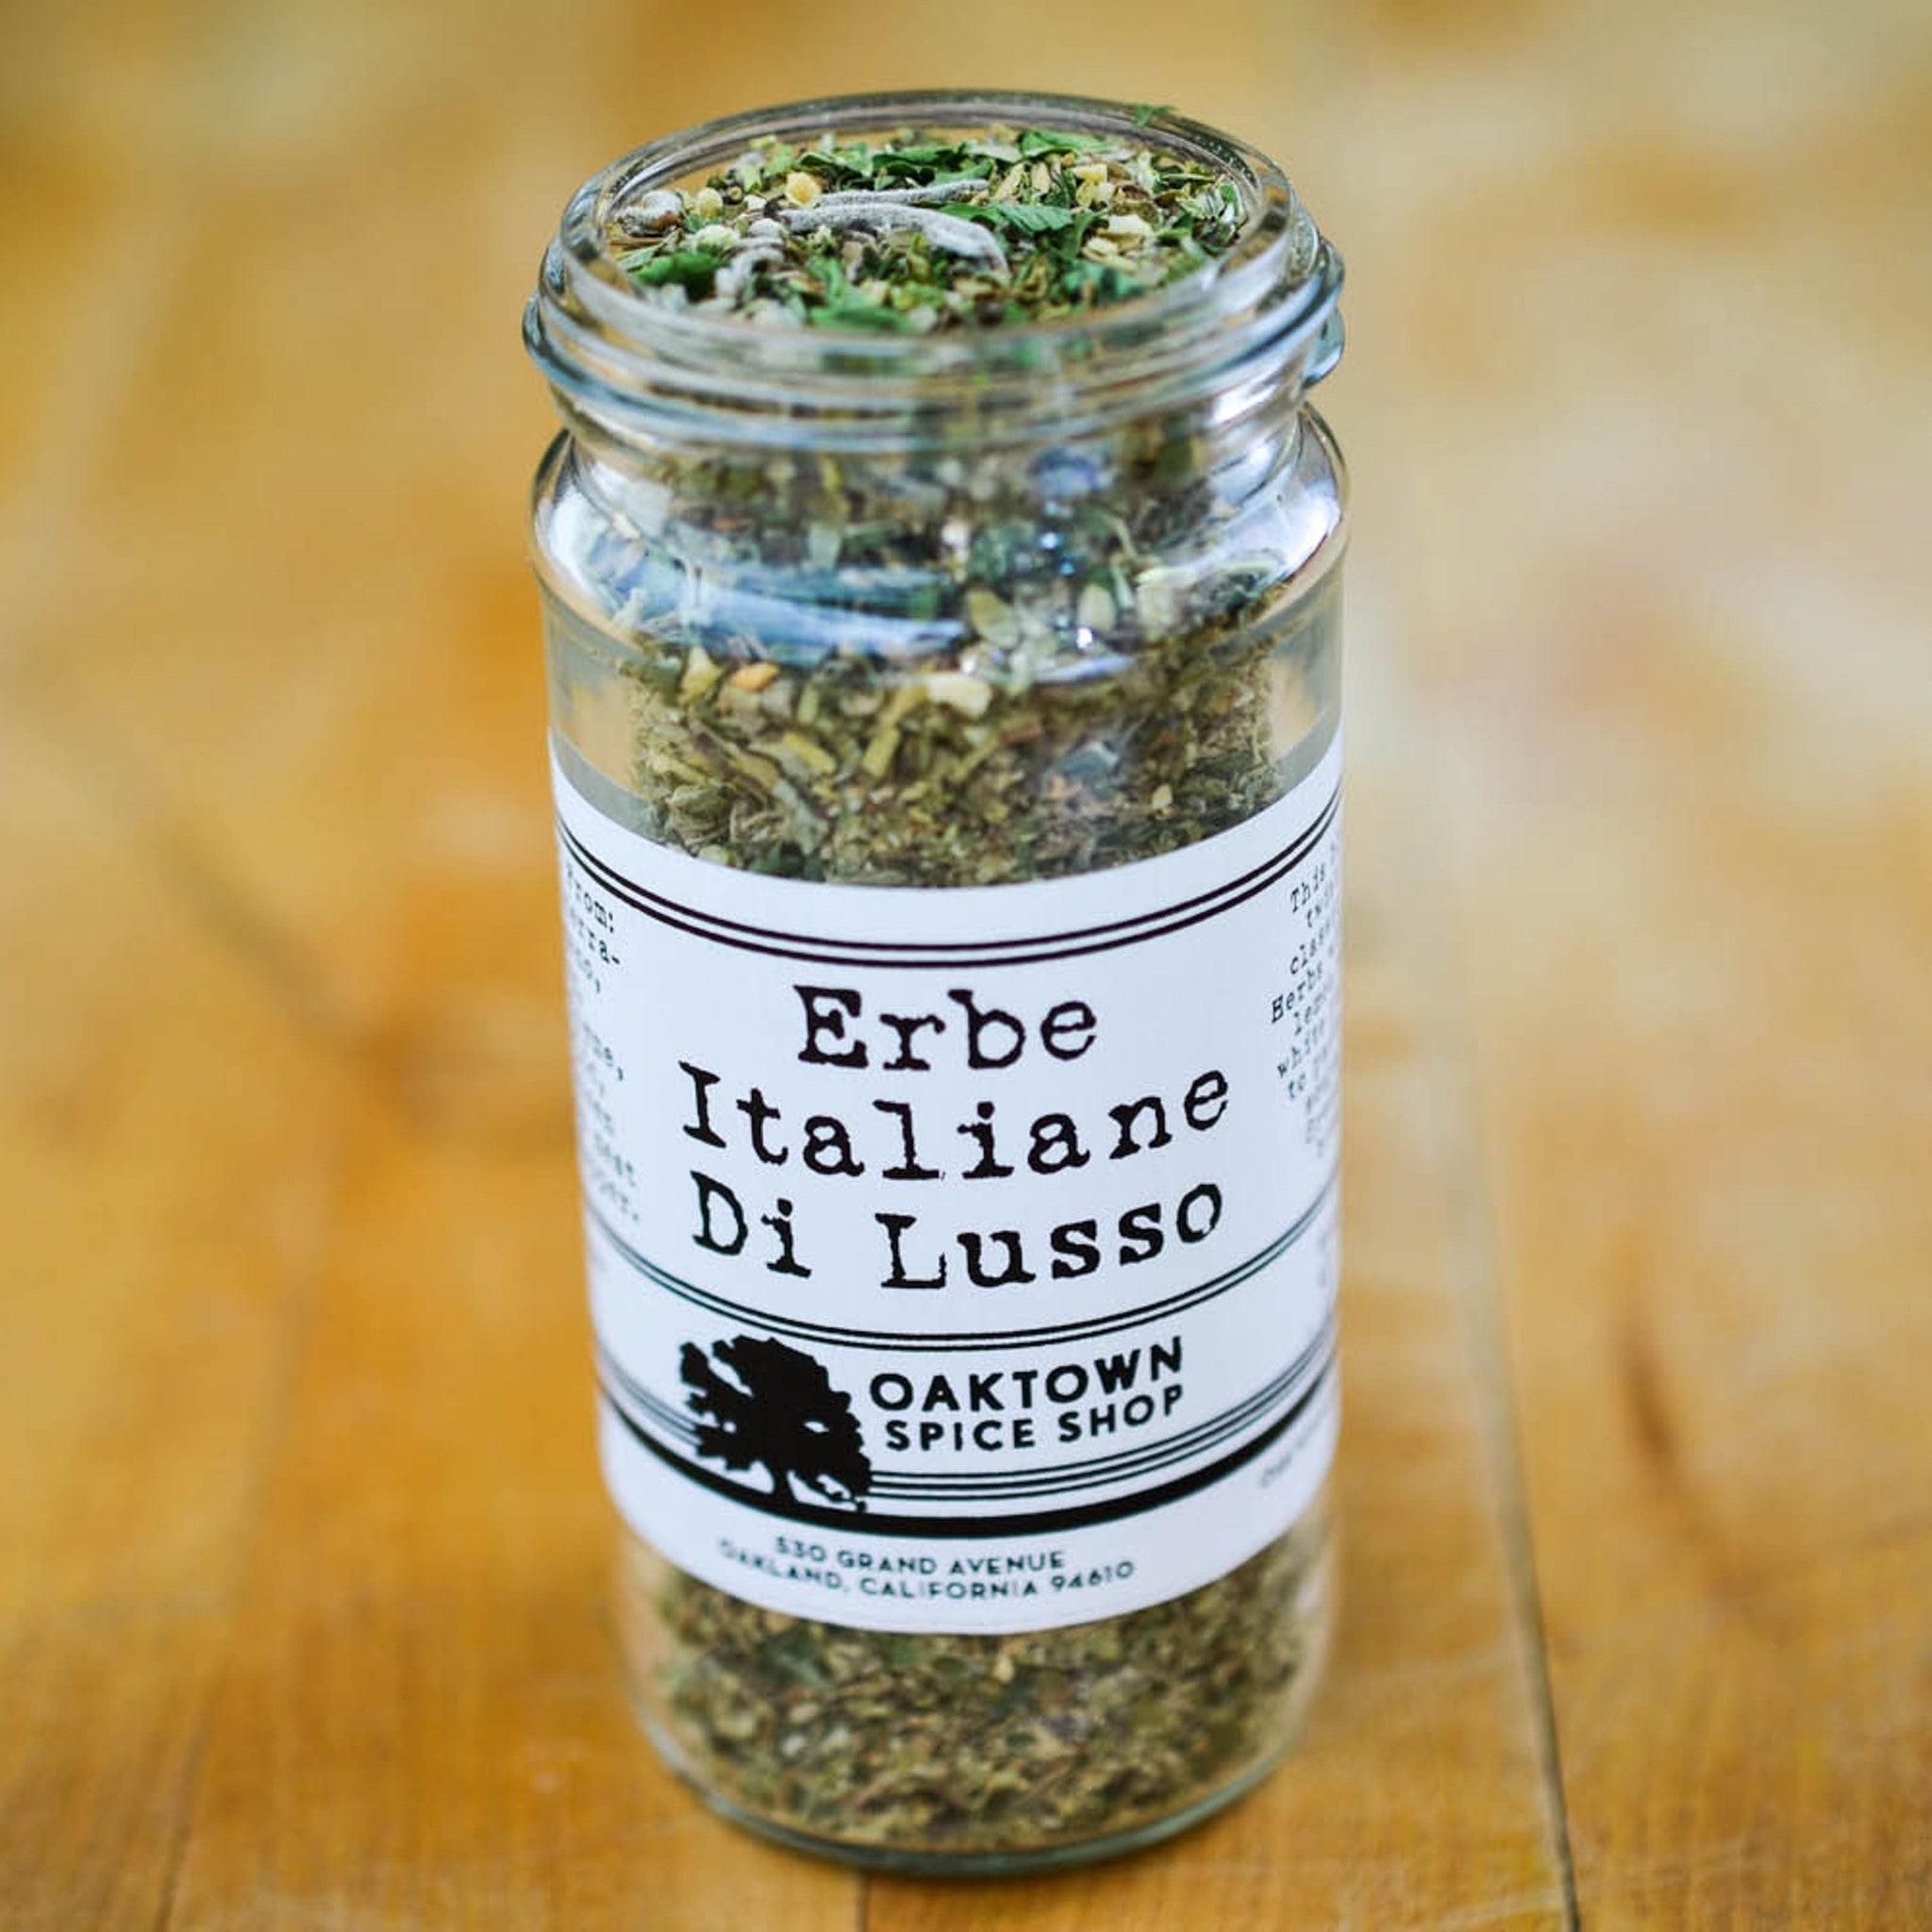 Erbe Italiane di Lusso is Hand Mixed with Garlic, Basil, Mediterranean Oregano, Rosemary, Marjoram, Parsley, Green Onion, Thyme, Sage, Lemon Zest and White Pepper by Oaktown Spice Shop